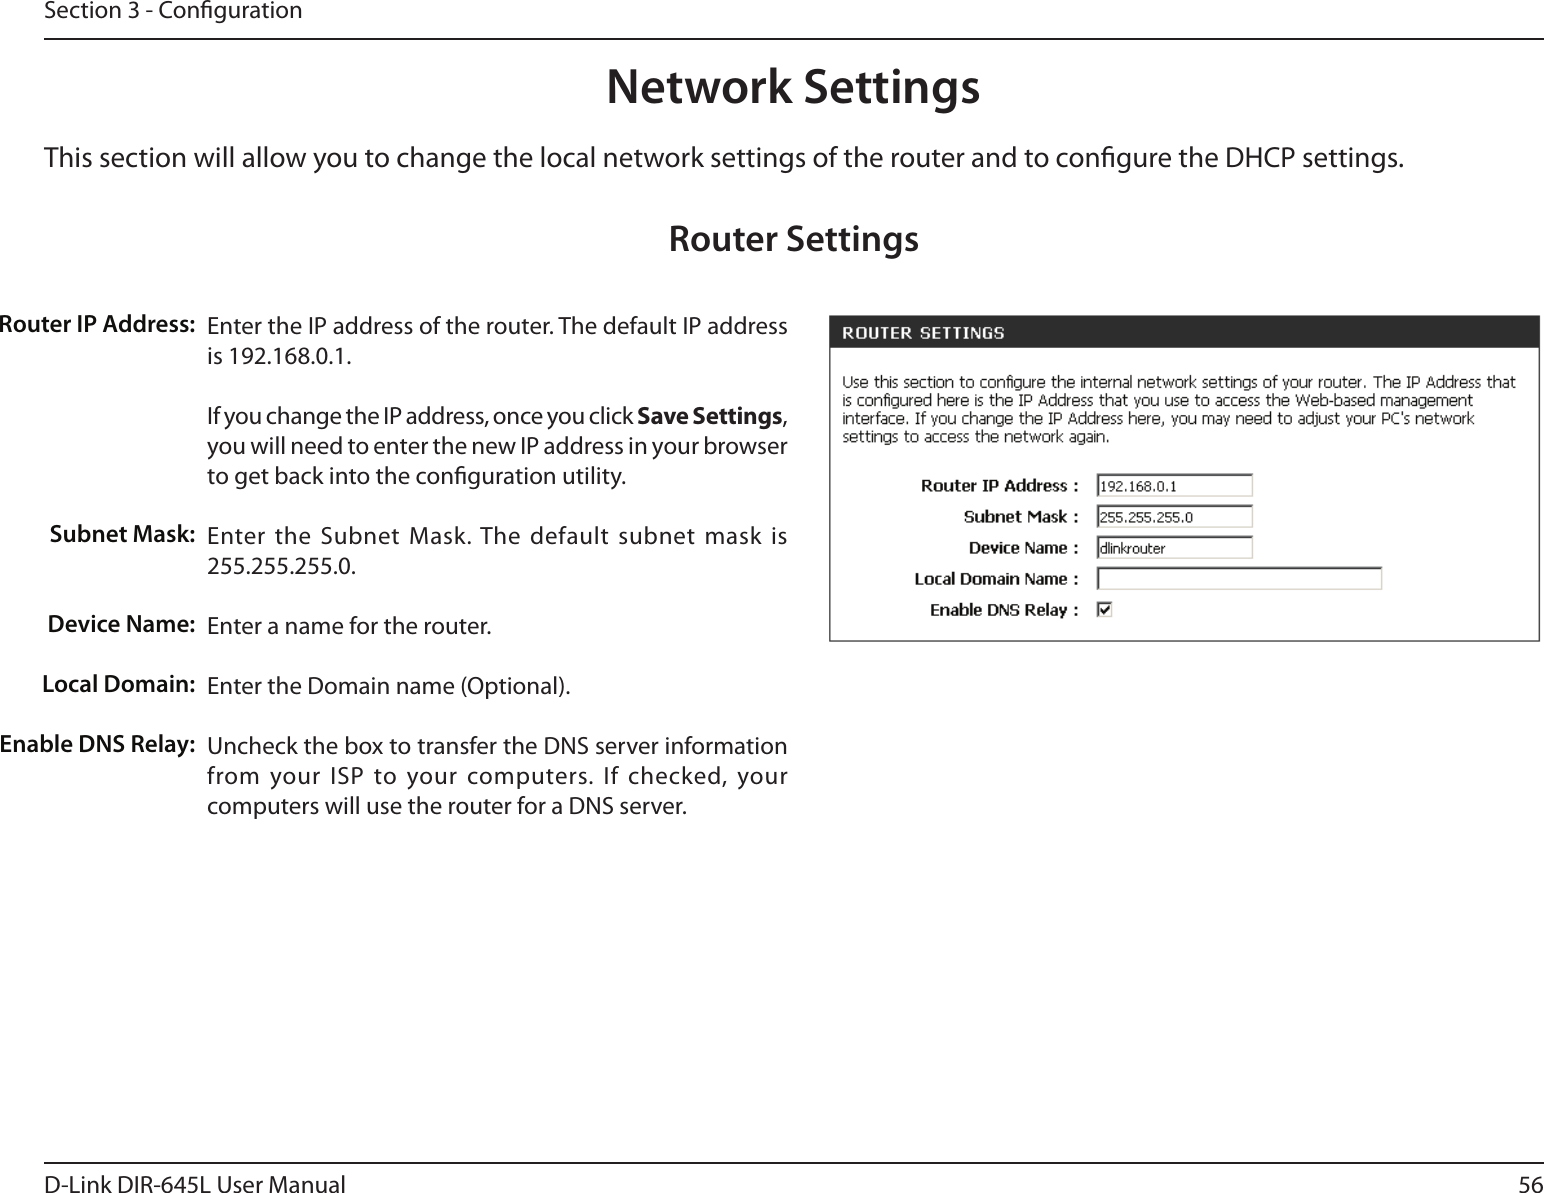 56D-Link DIR-645L User ManualSection 3 - CongurationThis section will allow you to change the local network settings of the router and to congure the DHCP settings.Network SettingsEnter the IP address of the router. The default IP address is 192.168.0.1.If you change the IP address, once you click Save Settings, you will need to enter the new IP address in your browser to get back into the conguration utility.Enter the Subnet  Mask. The default  subnet mask  is 255.255.255.0.Enter a name for the router.Enter the Domain name (Optional).Uncheck the box to transfer the DNS server information from your ISP to your computers. If checked, your computers will use the router for a DNS server.Router IP Address:Subnet Mask:Device Name:Local Domain:Enable DNS Relay:Router Settings